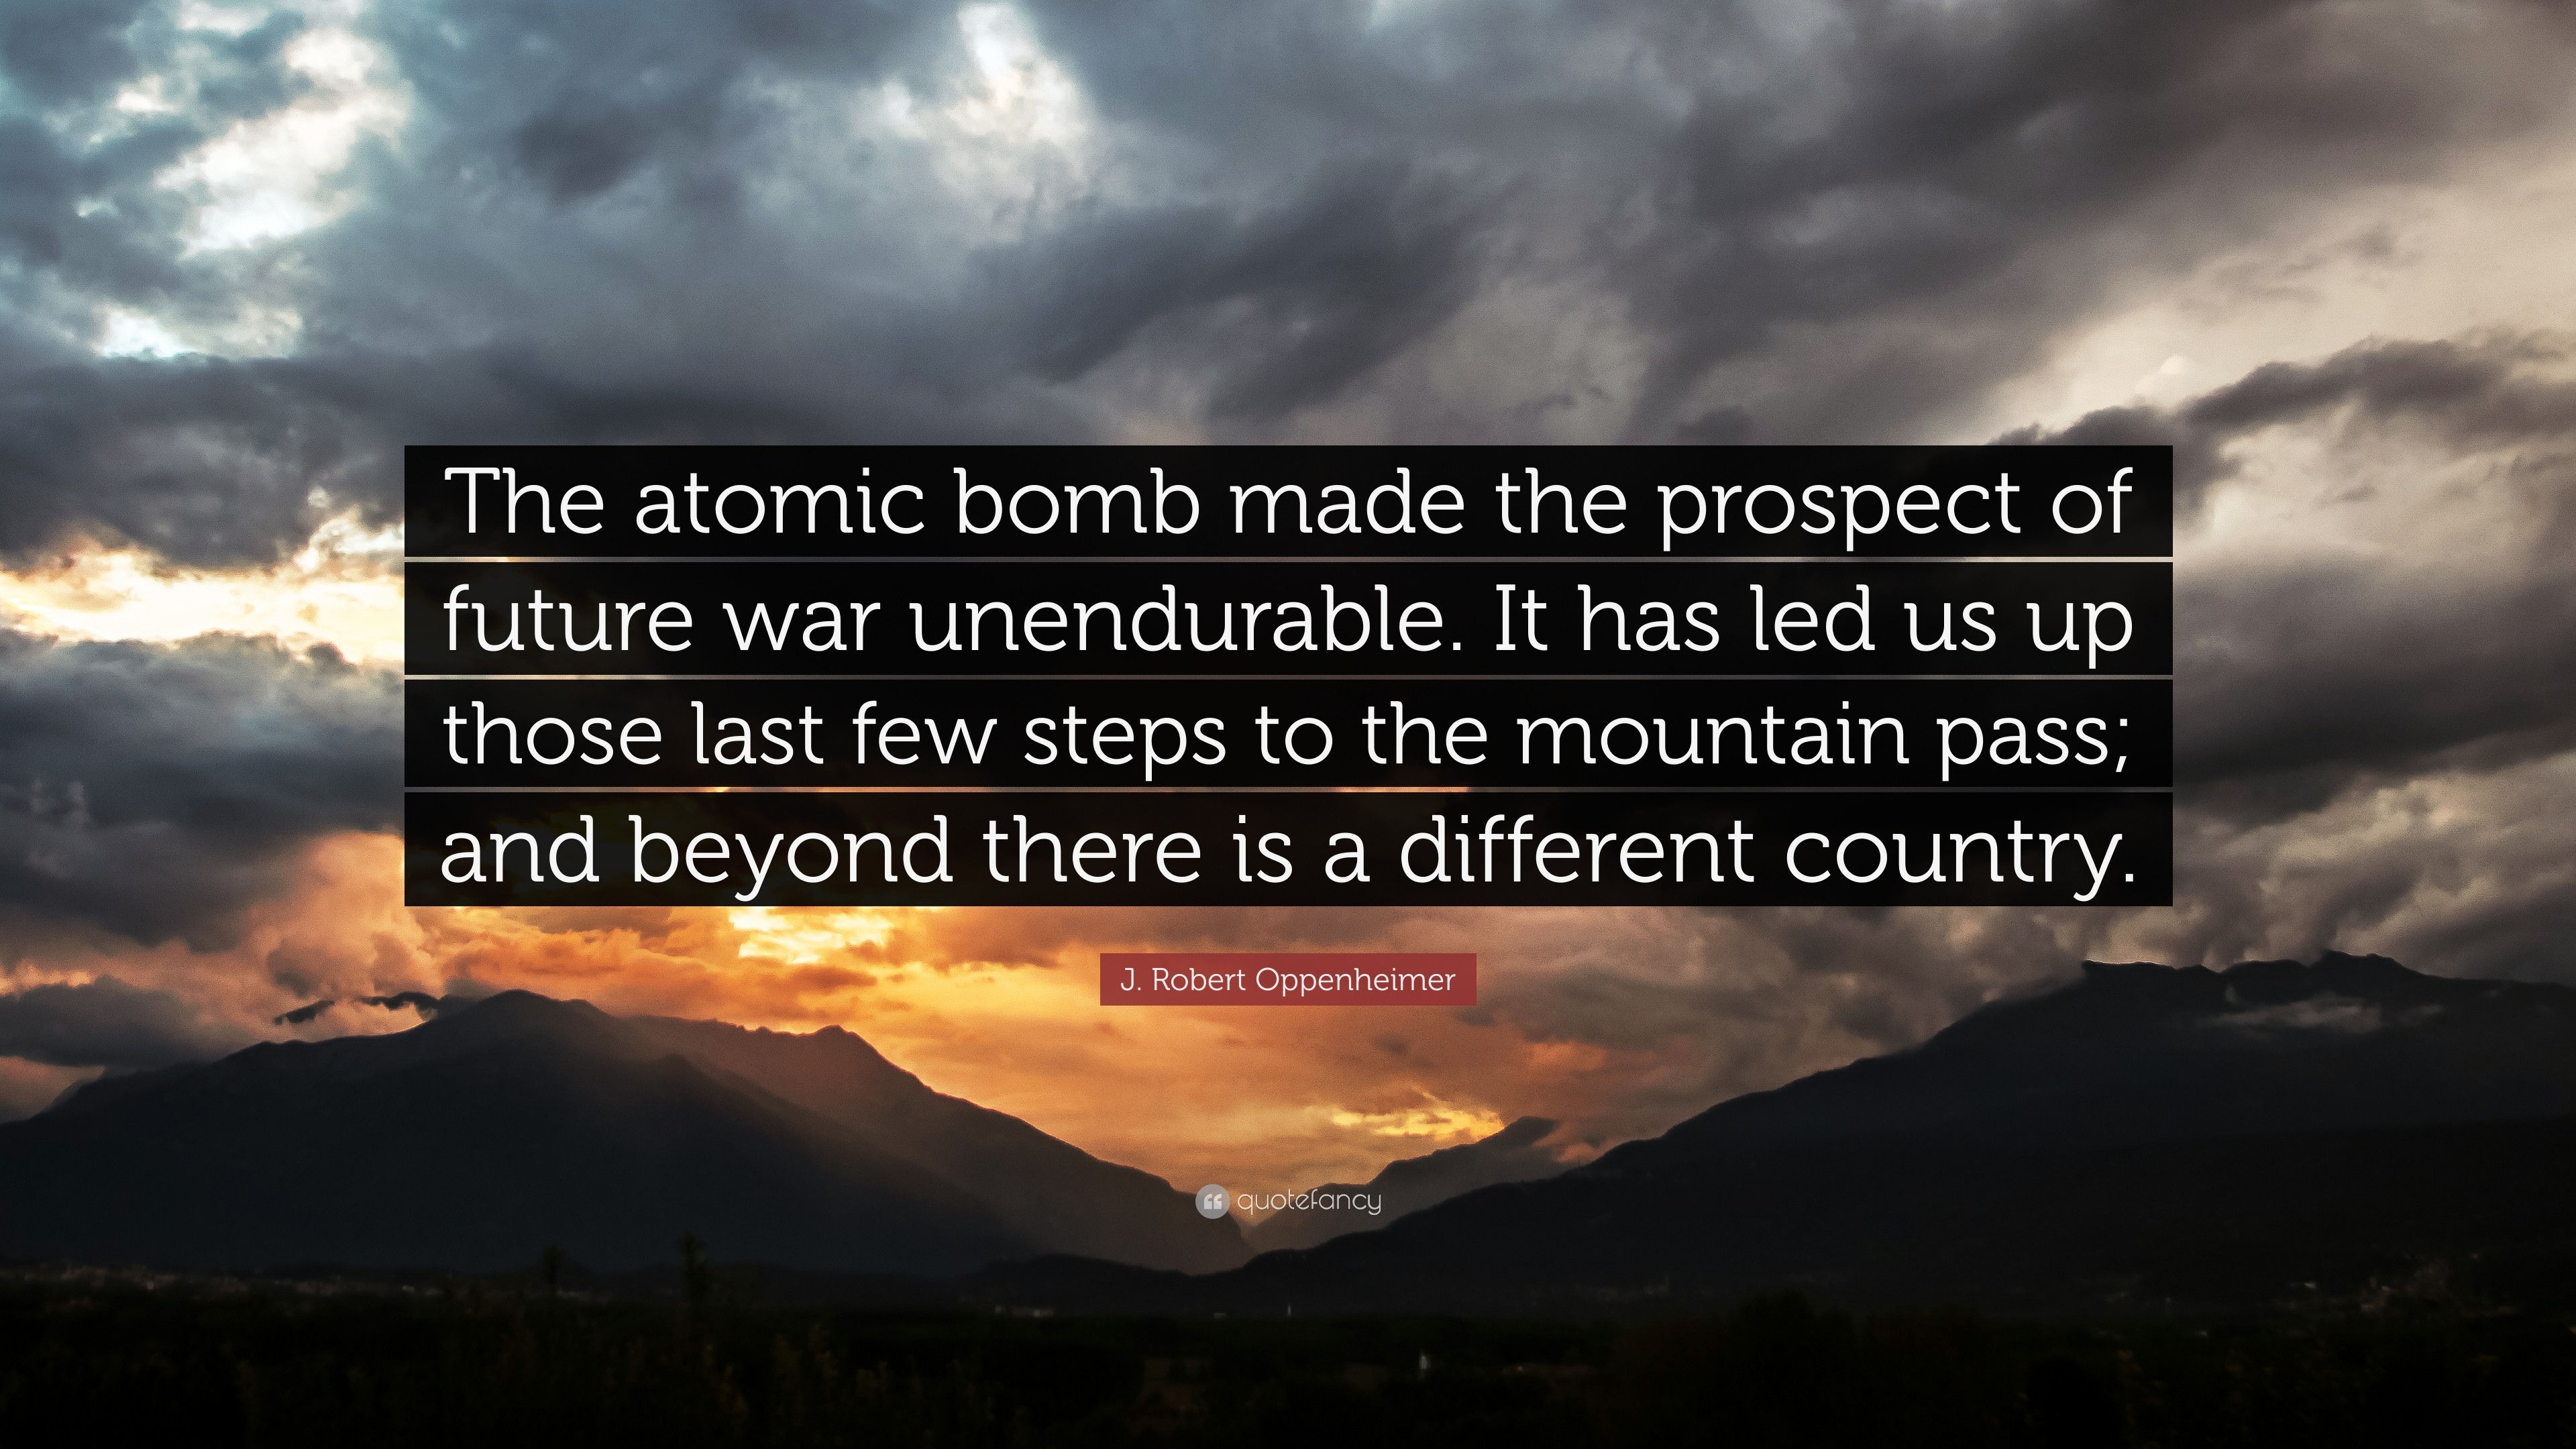 3840x2160 J. Robert Oppenheimer Quote: “The atomic bomb made the prospect of future  war